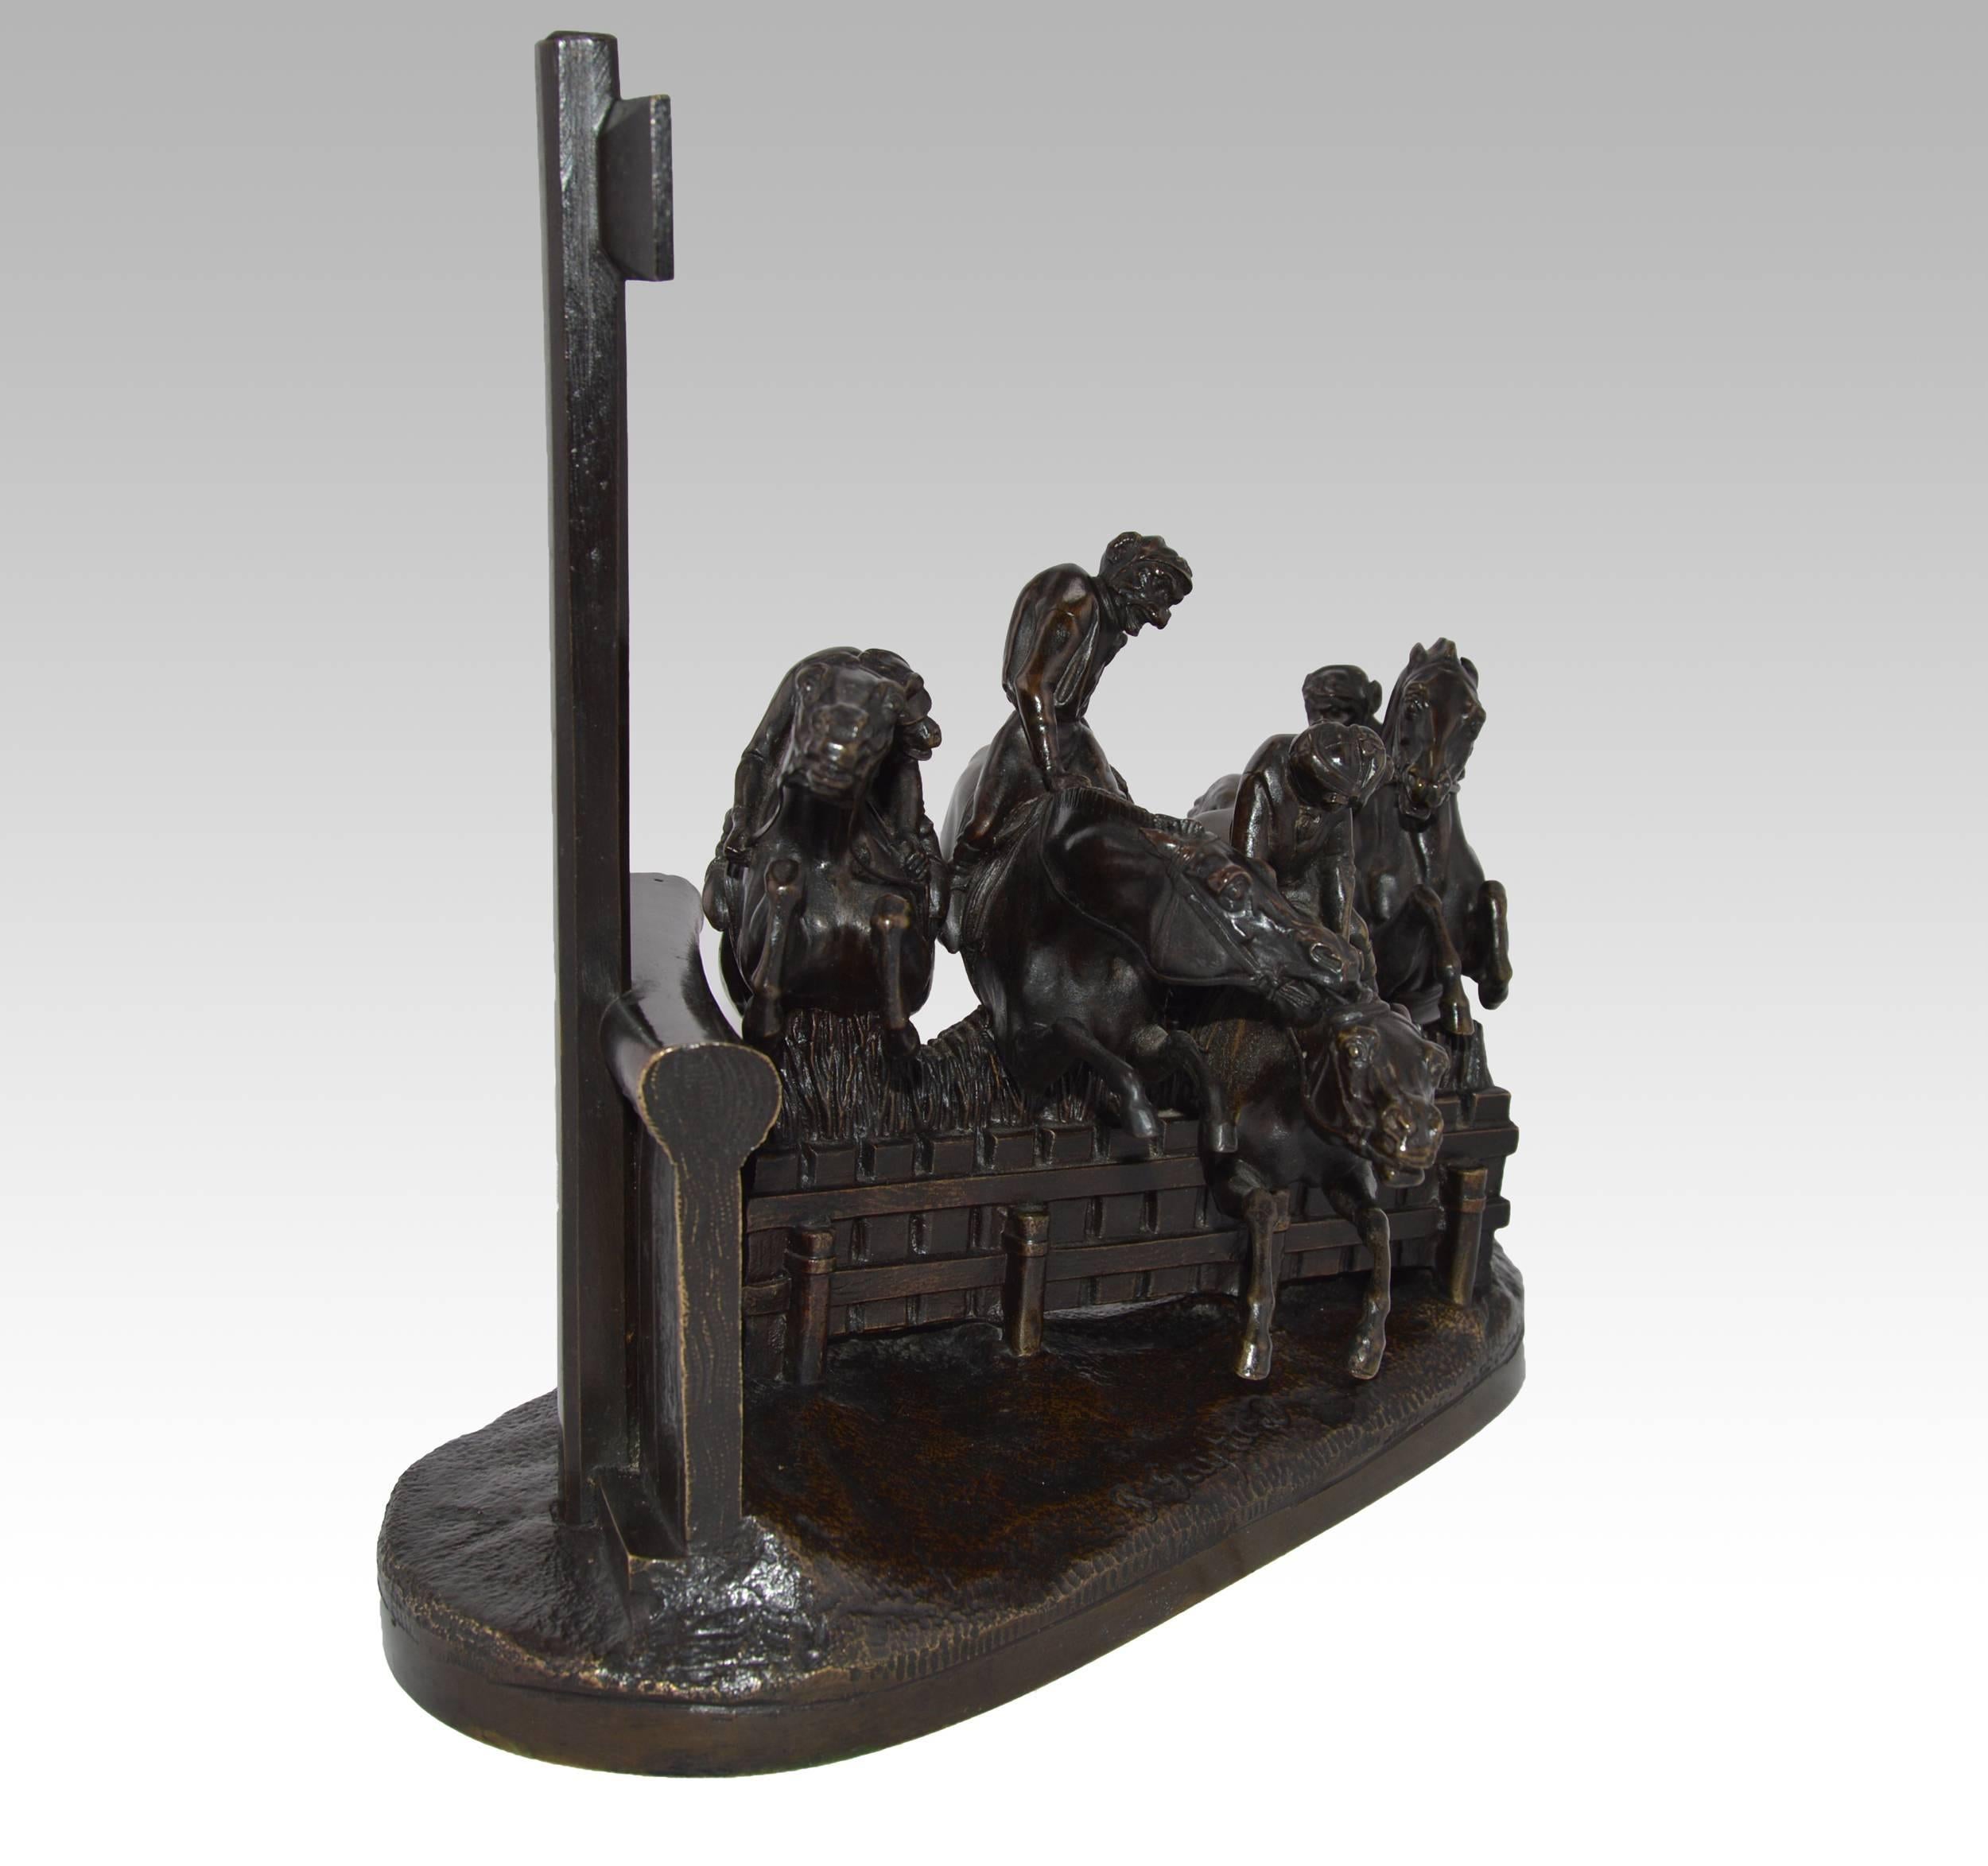 19th Century French bronze sculpture of monkeys racing on horses - Victorian Sculpture by Paul Joseph Raymond Gayrard